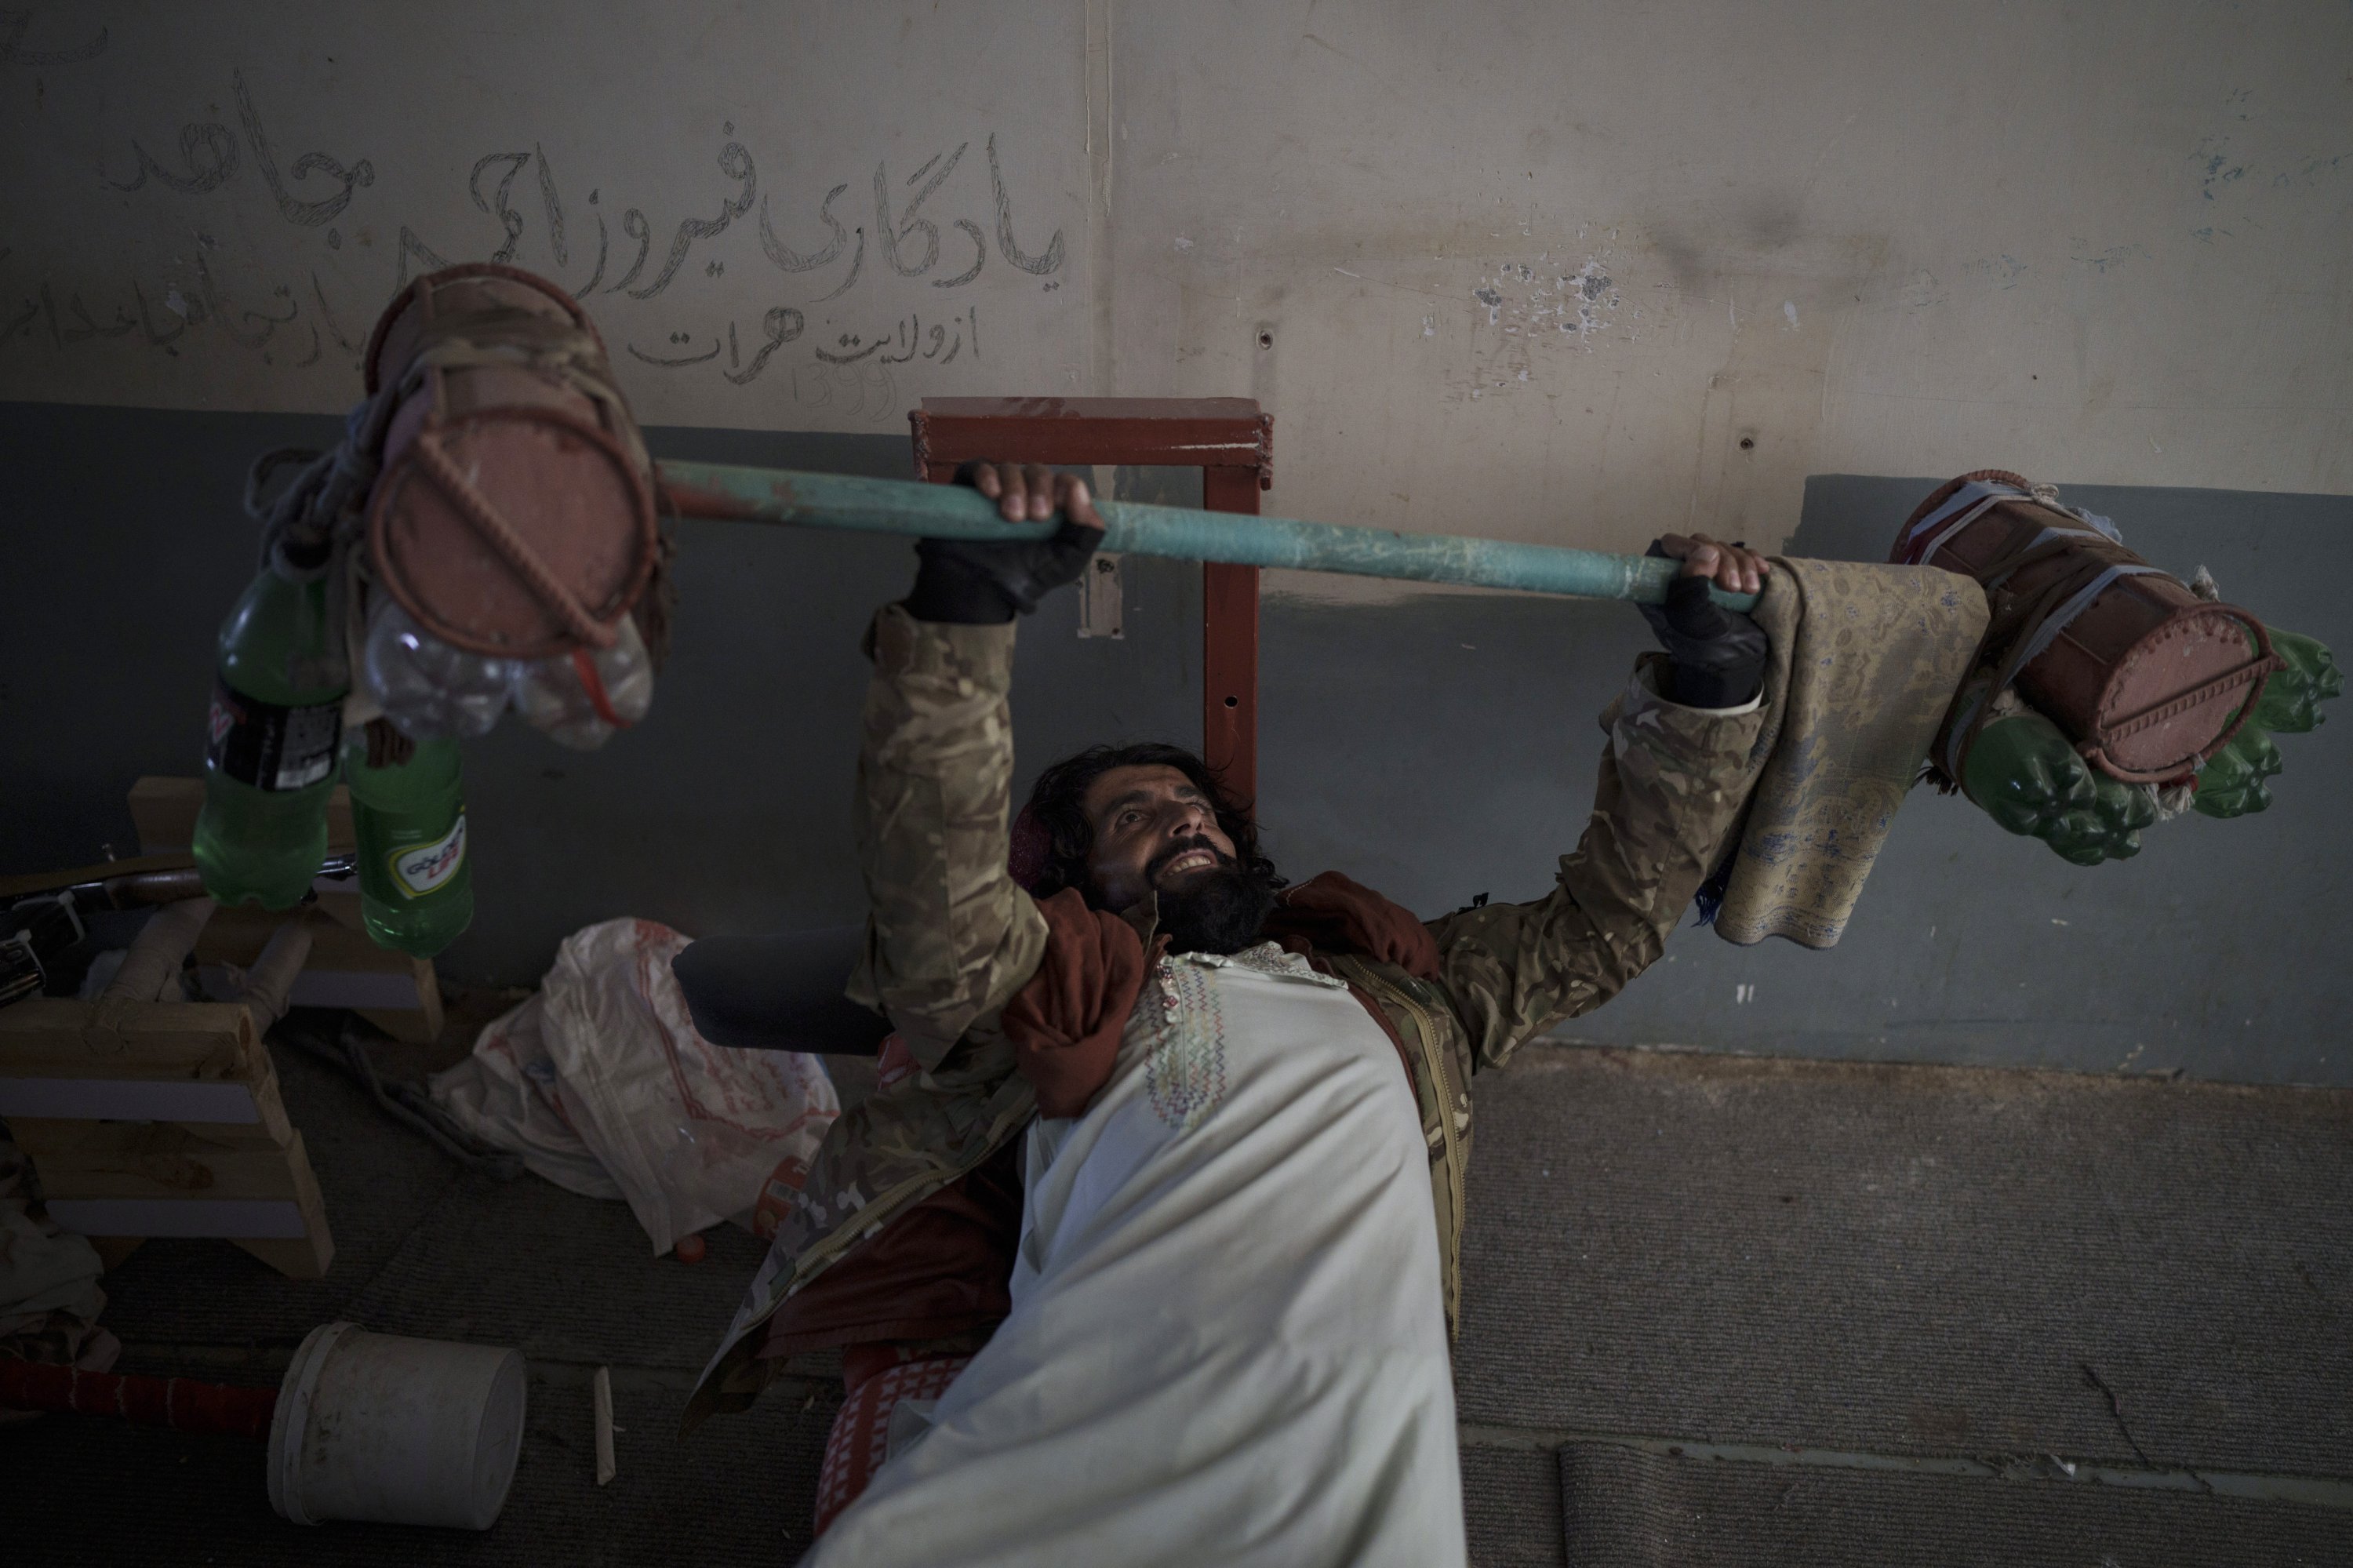 A Taliban fighter lifts a makeshift weight left behind by former prisoners at an empty area of the Pul-e-Charkhi prison in Kabul, Afghanistan, Sept. 13, 2021. (AP Photo)